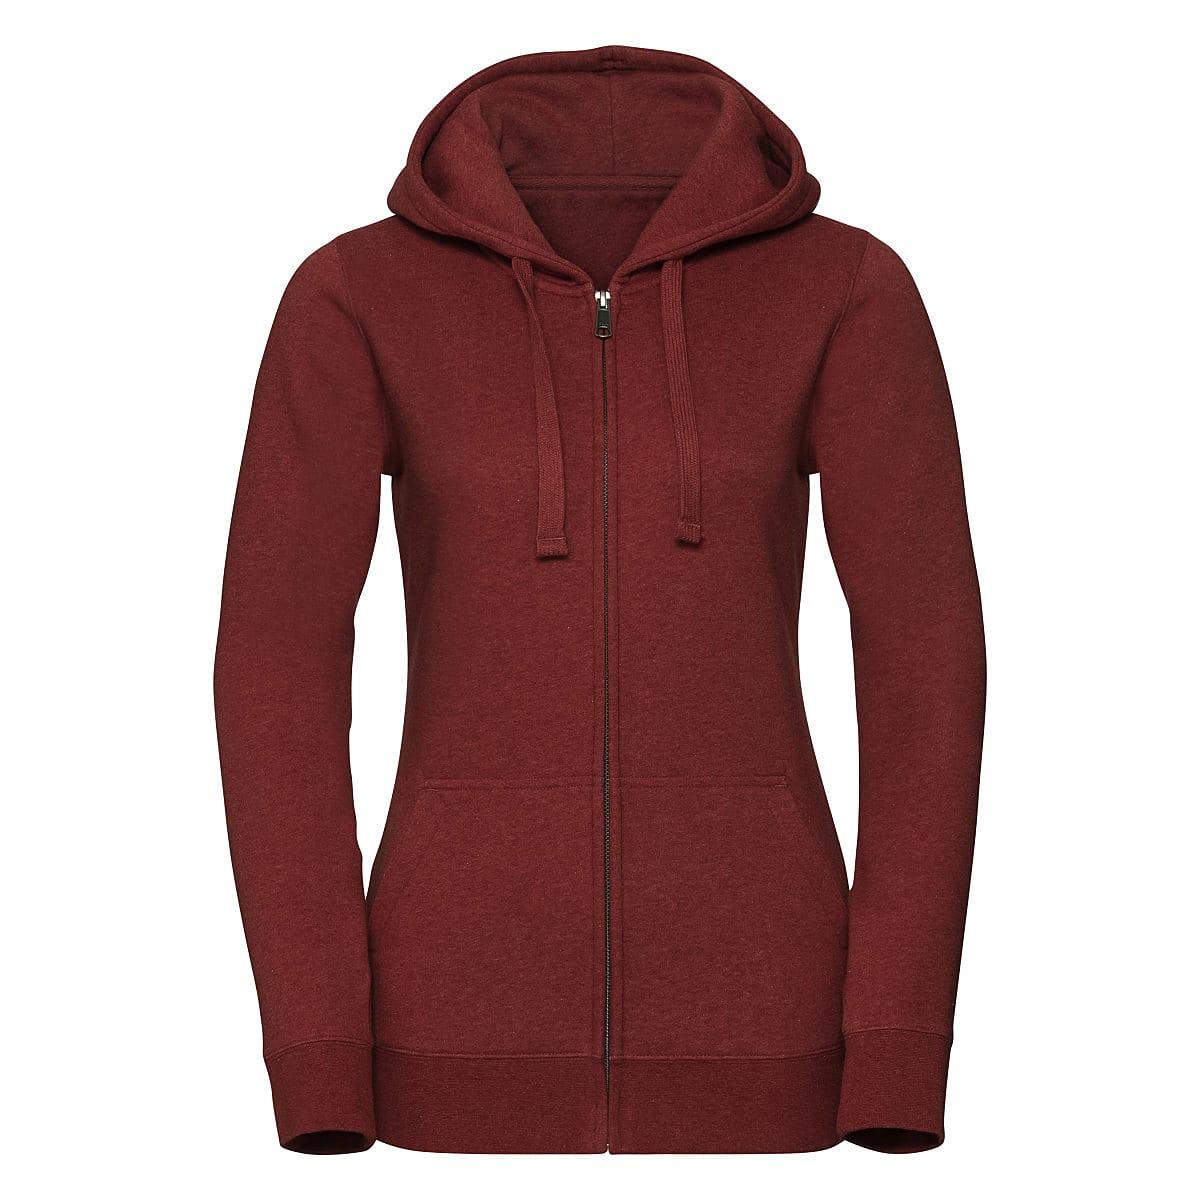 Russell Womens Authentic Melange Zipped Hoodie in Brick Red Melange (Product Code: R263F)